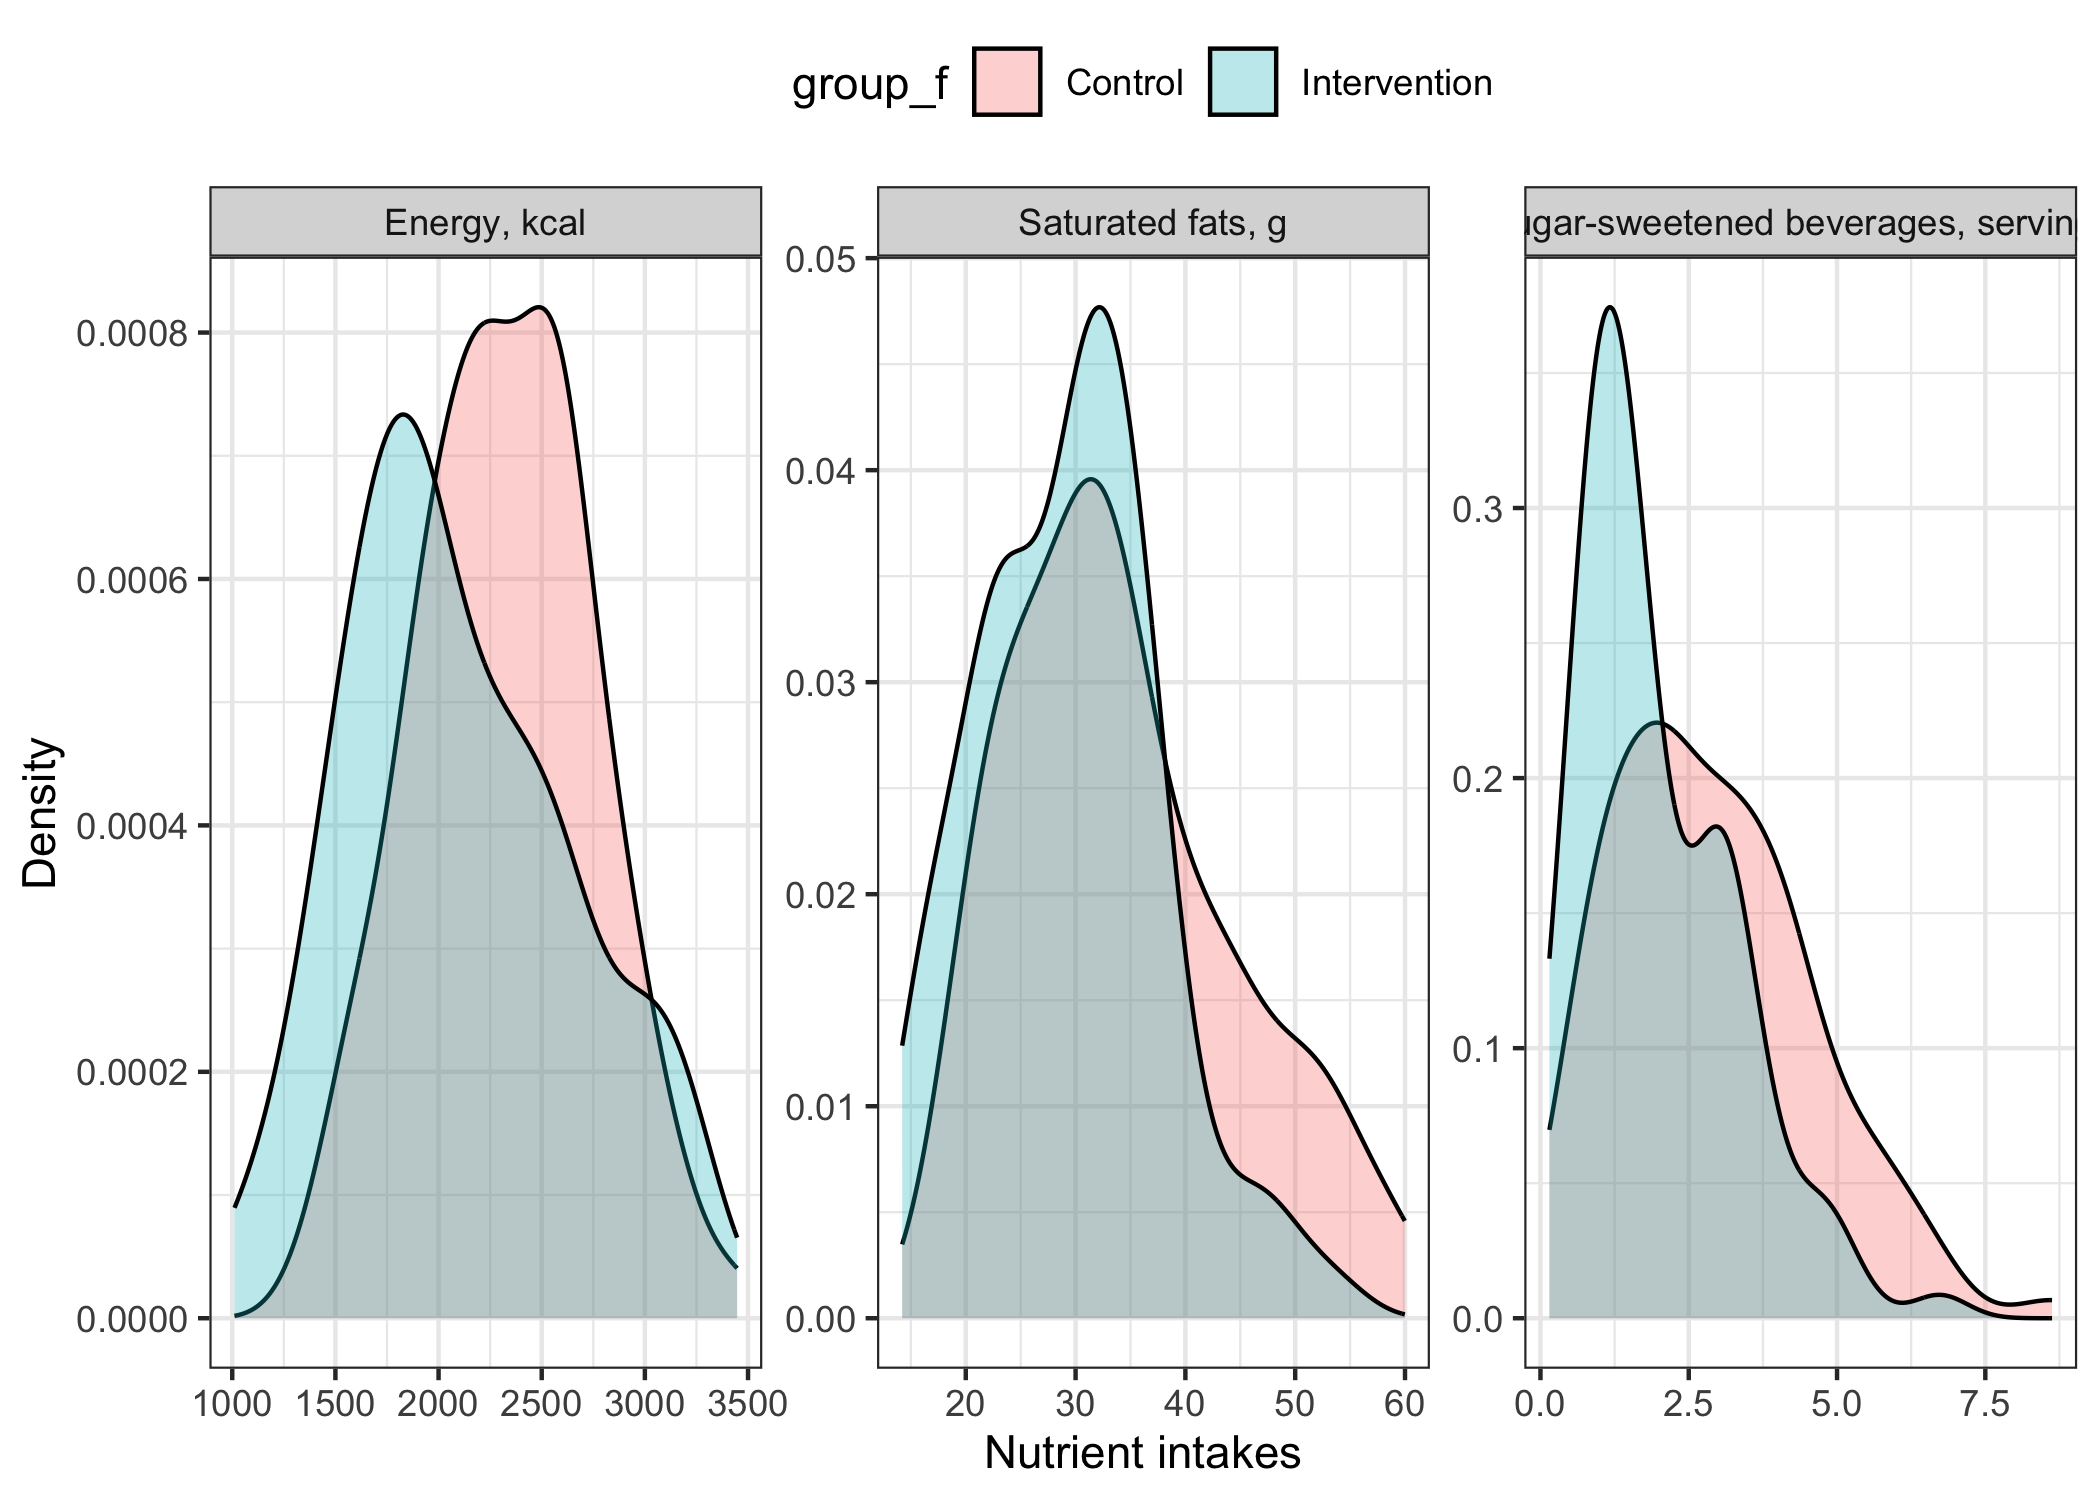 Figure 1: Distribution of simulated nutrient intake data among two groups of 100 individuals